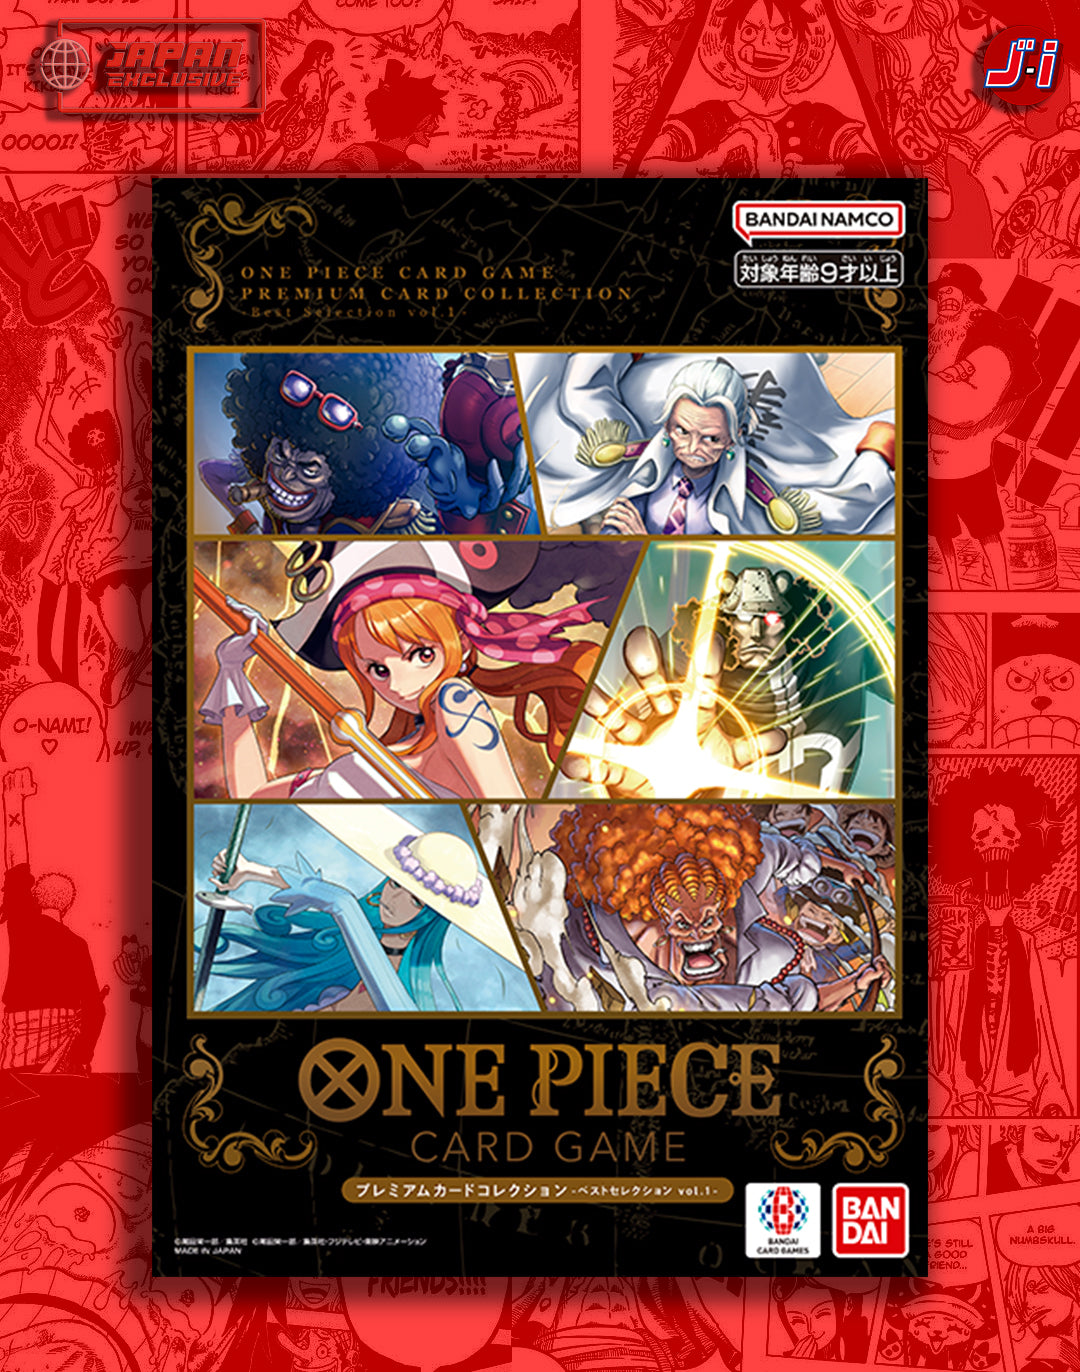 Protège-cartes Monkey D. Luffy Vol.01 One Piece Card Game